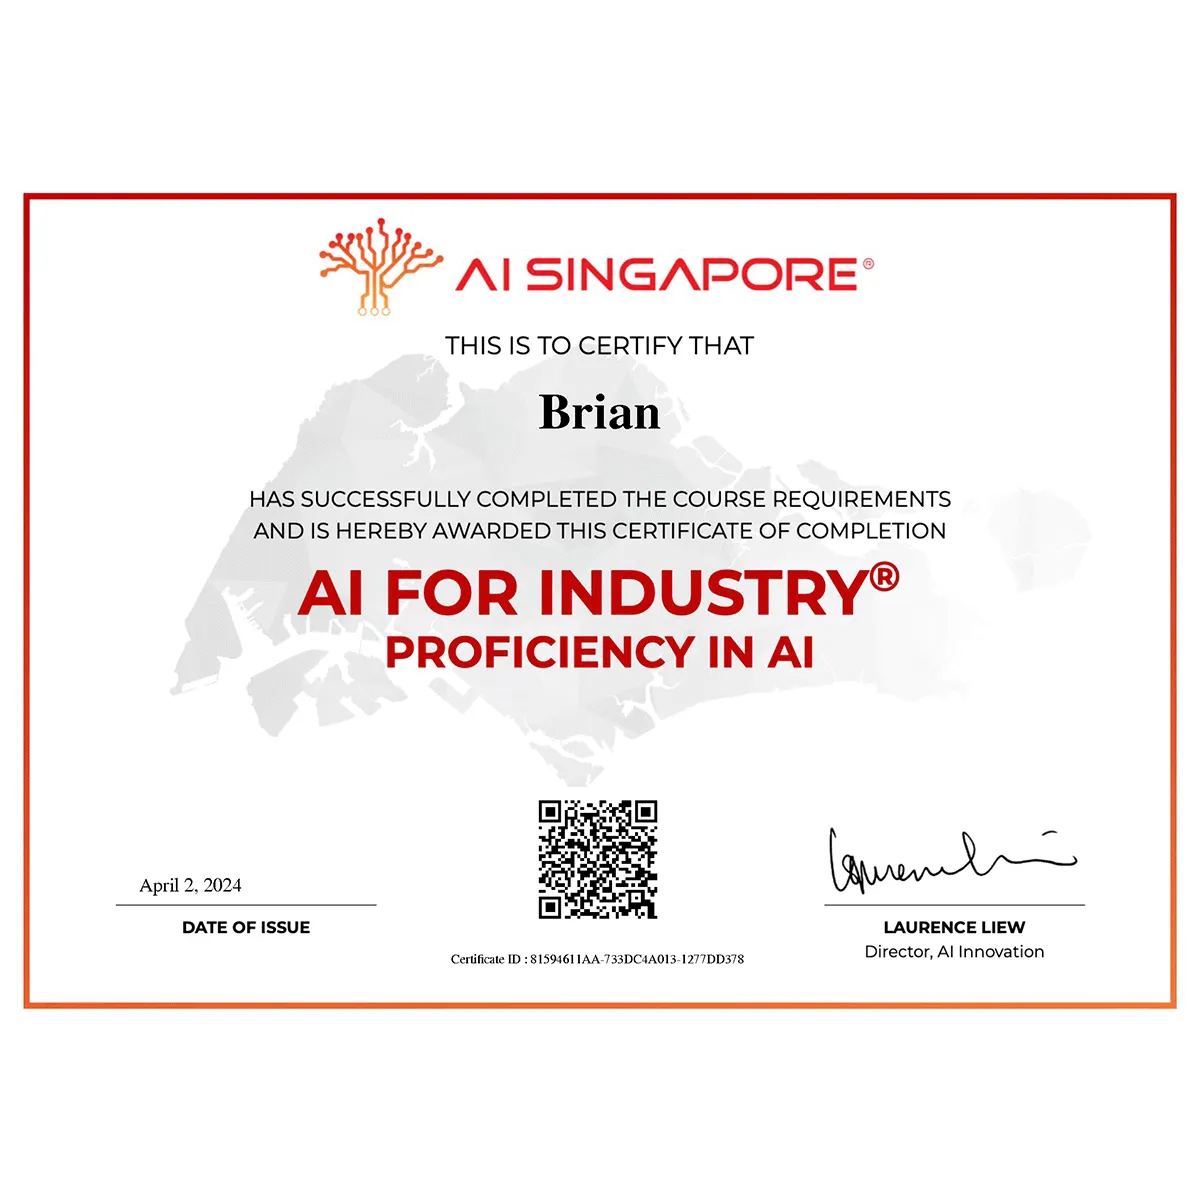 AI Singapore Proficiency in AI certificate awarded to Brian Tham